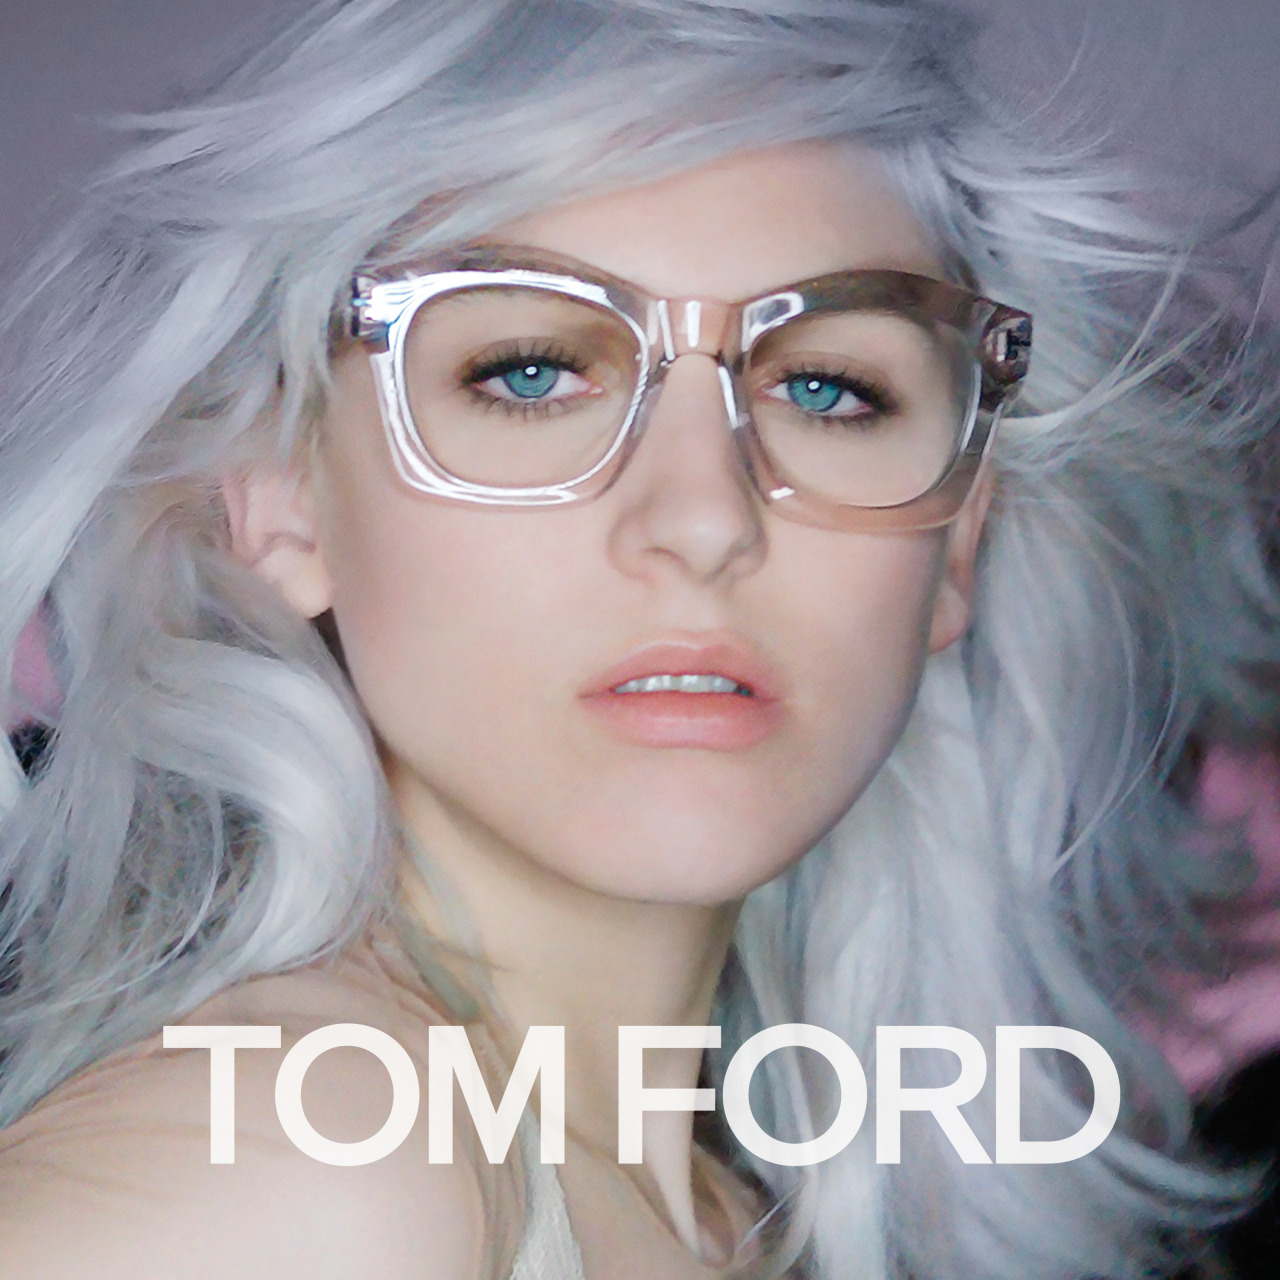 TOM FORD - Introducing the TOM FORD Spring/Summer 2016 ad...